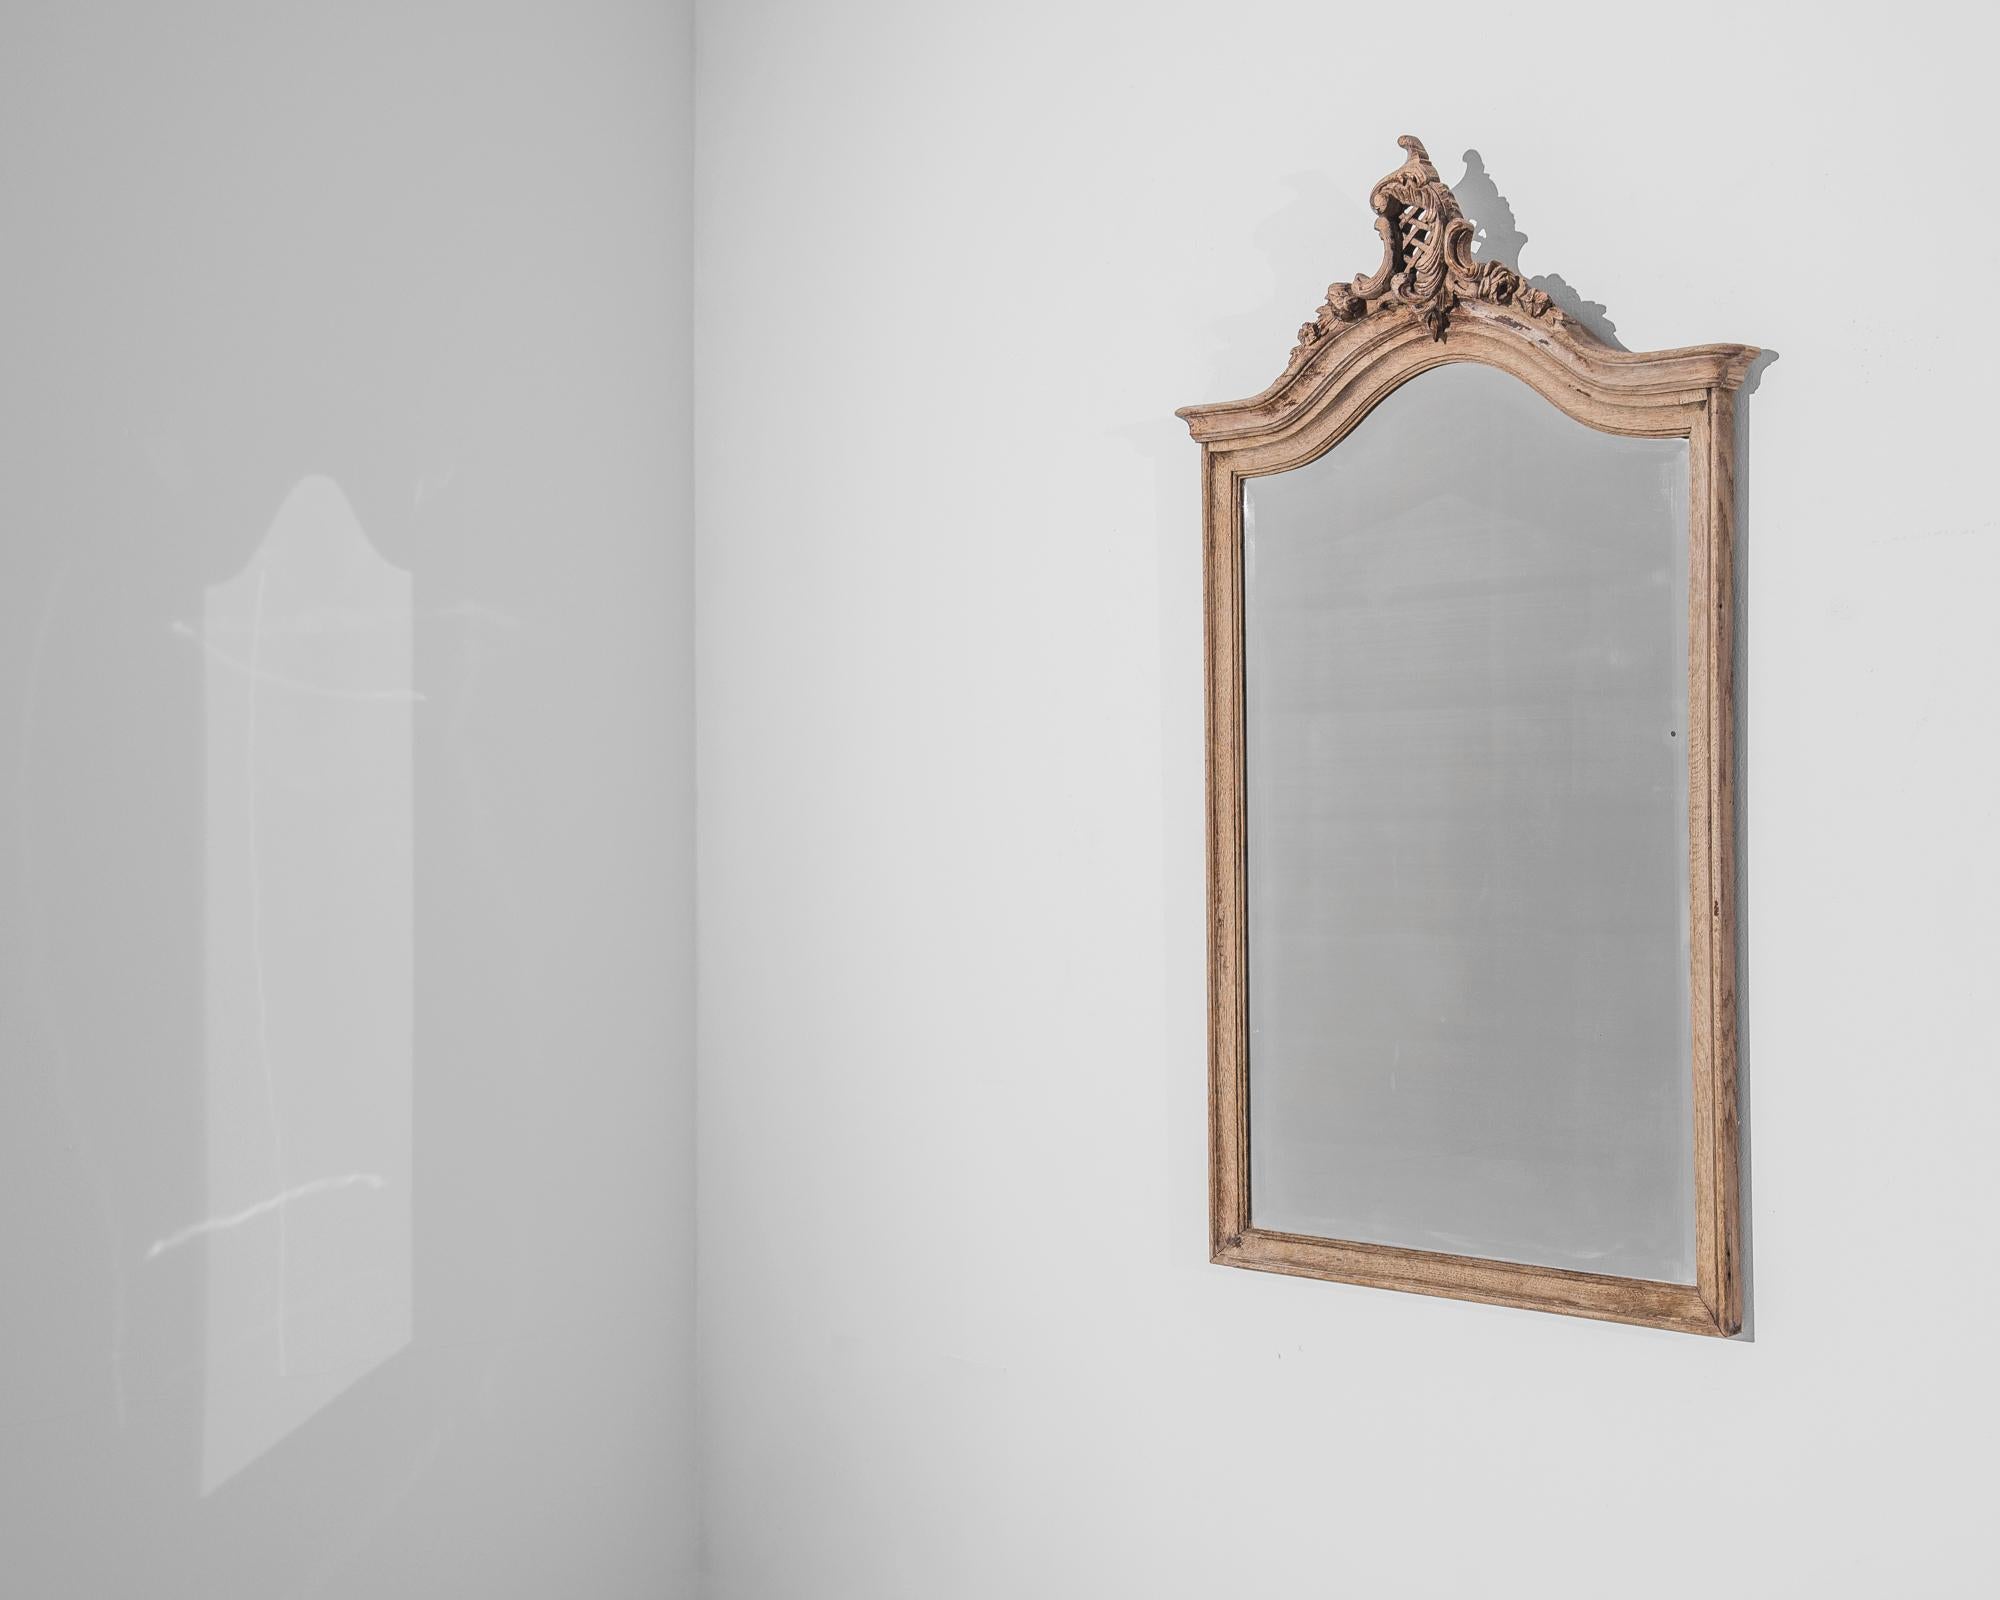 A wall mirror from 1920s France with a carved oak frame. The rectangular frame arches at the top, crowned with a stylized decoration subtly mimicking natural forms. The oak frame has a natural finish and a warm russet tone, accentuating the